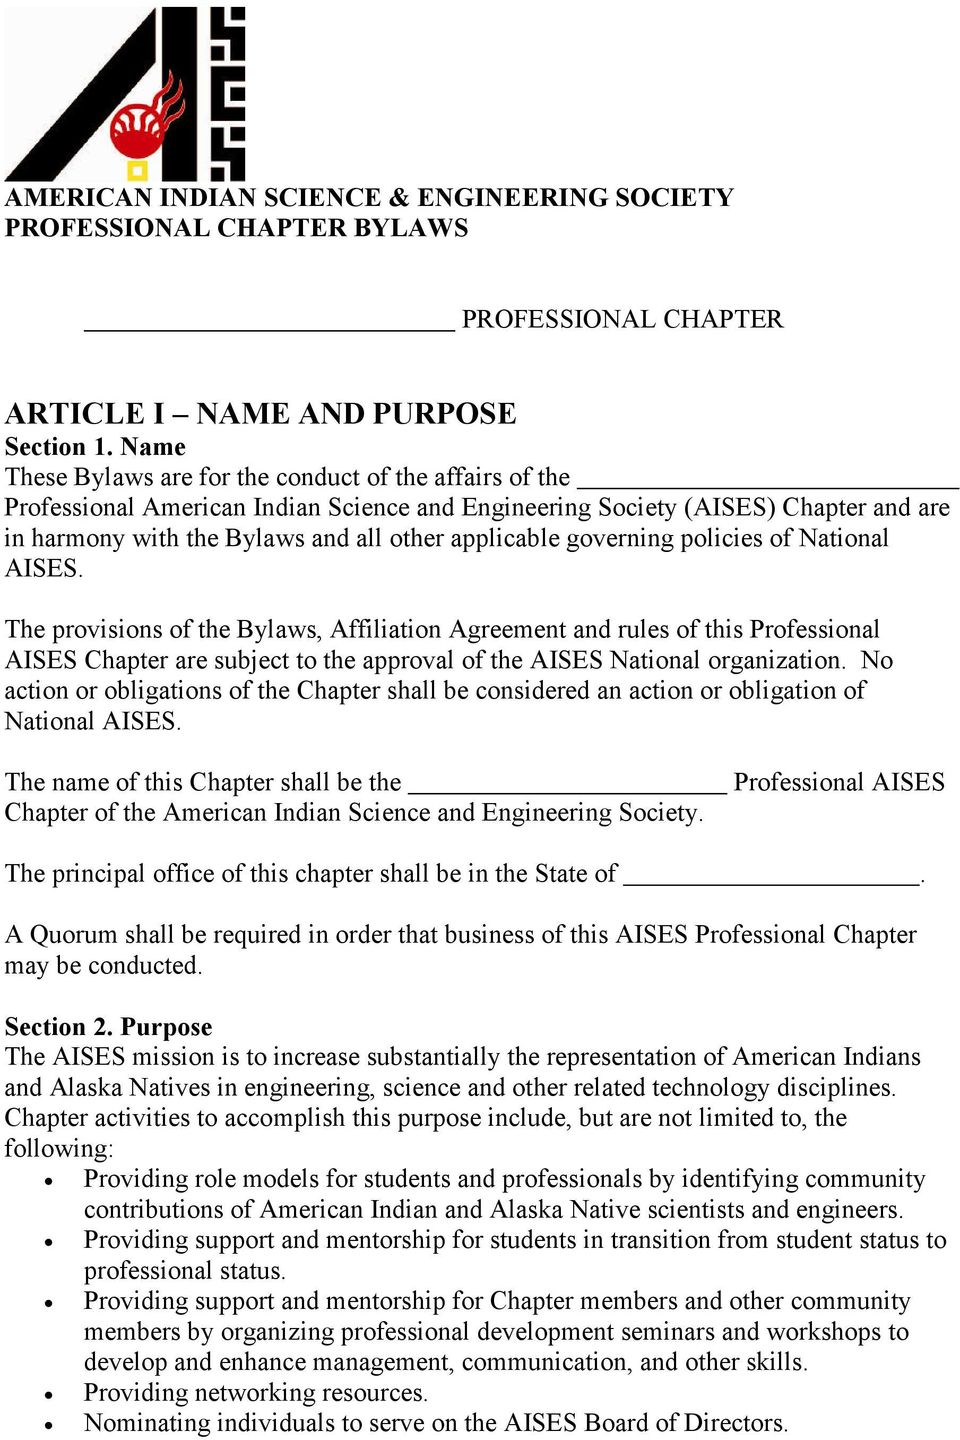 governing policies of National AISES. The provisions of the Bylaws, Affiliation Agreement and rules of this Professional AISES Chapter are subject to the approval of the AISES National organization.